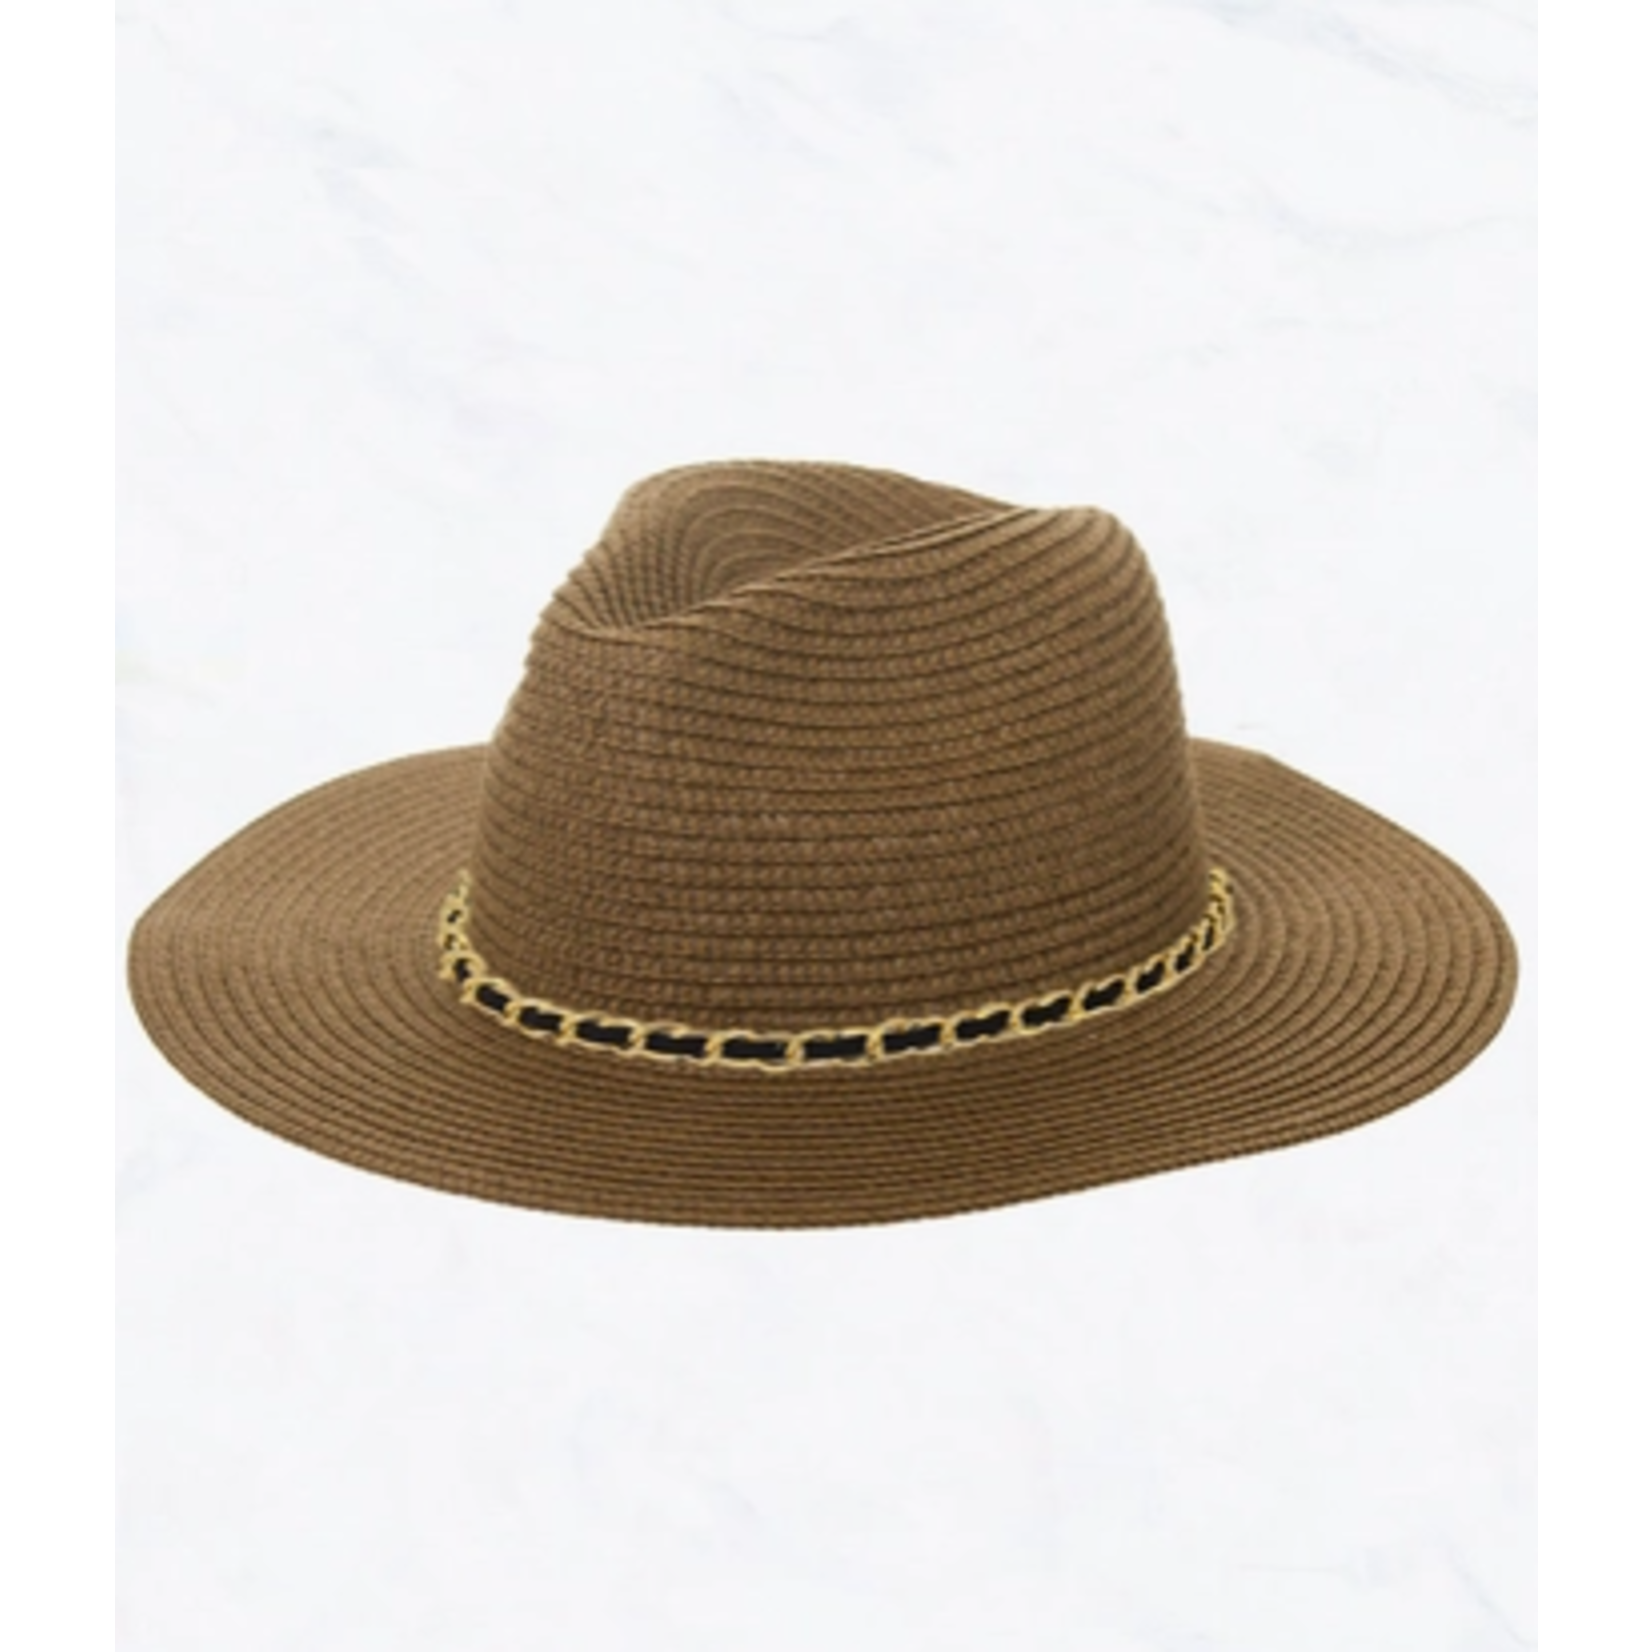 Suzie Q SQ Chained Leather Belt Sunscreen Straw Hat Coffee